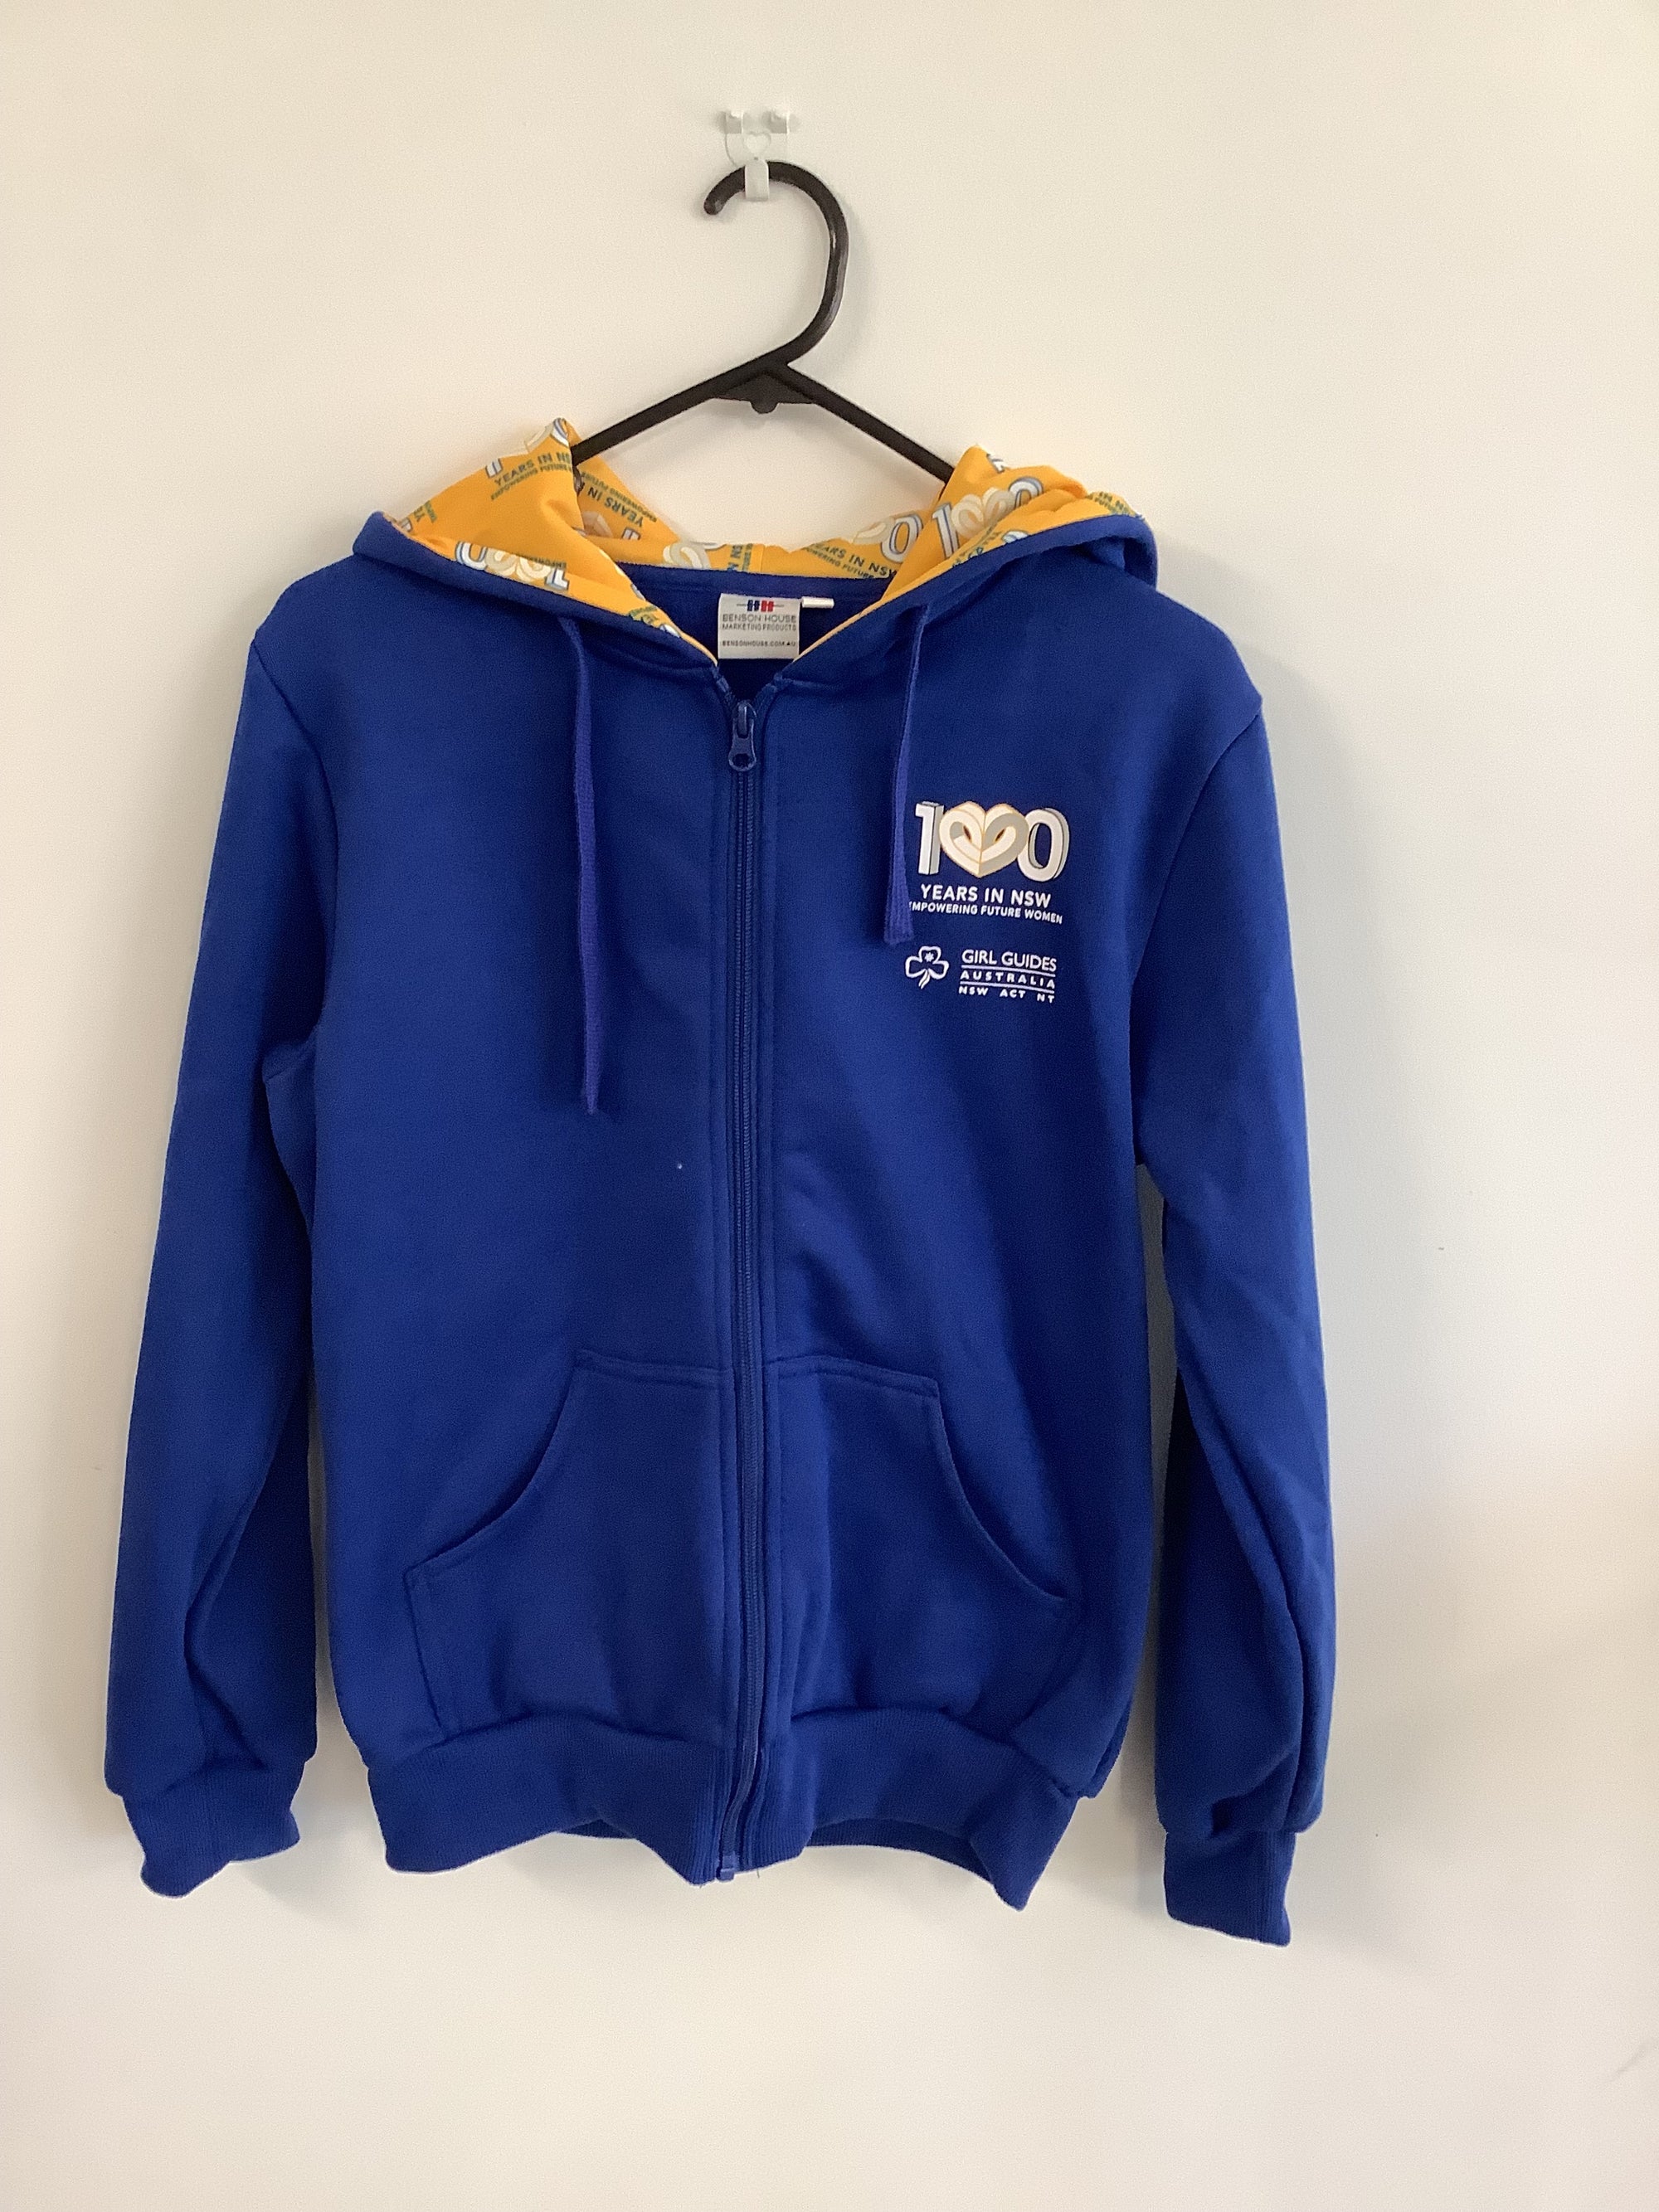 a blue hoodie with a zip front and yellow inside the hood